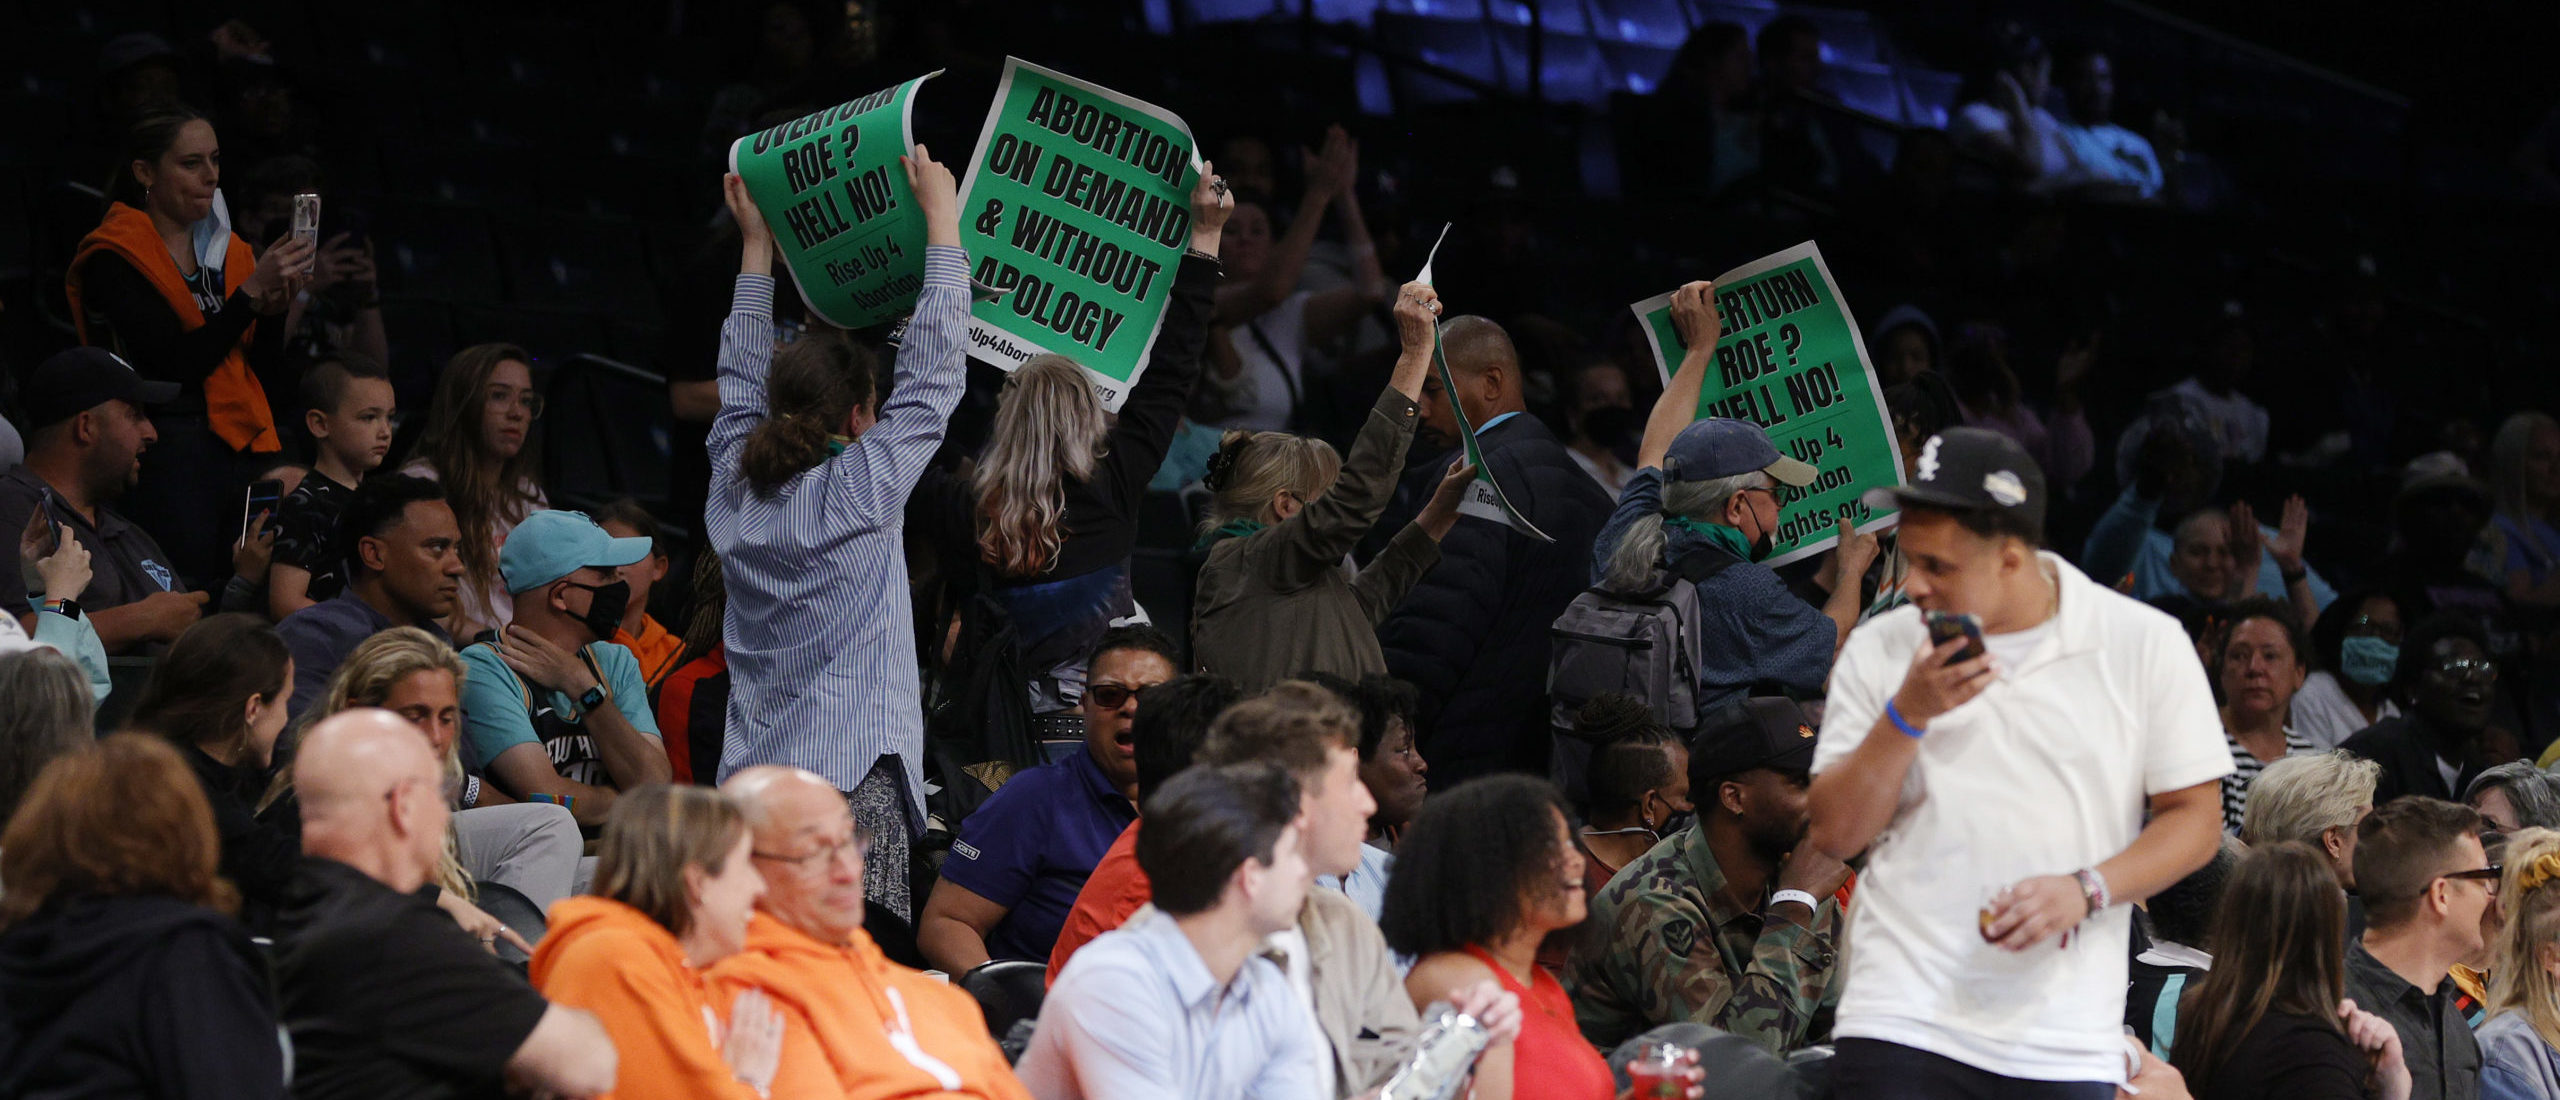 NEW YORK, NEW YORK - JUNE 07: Protestors display signs during the second half between the New York Liberty and the Minnesota Lynx at Barclays Center on June 07, 2022 in the Brooklyn borough of New York City. 